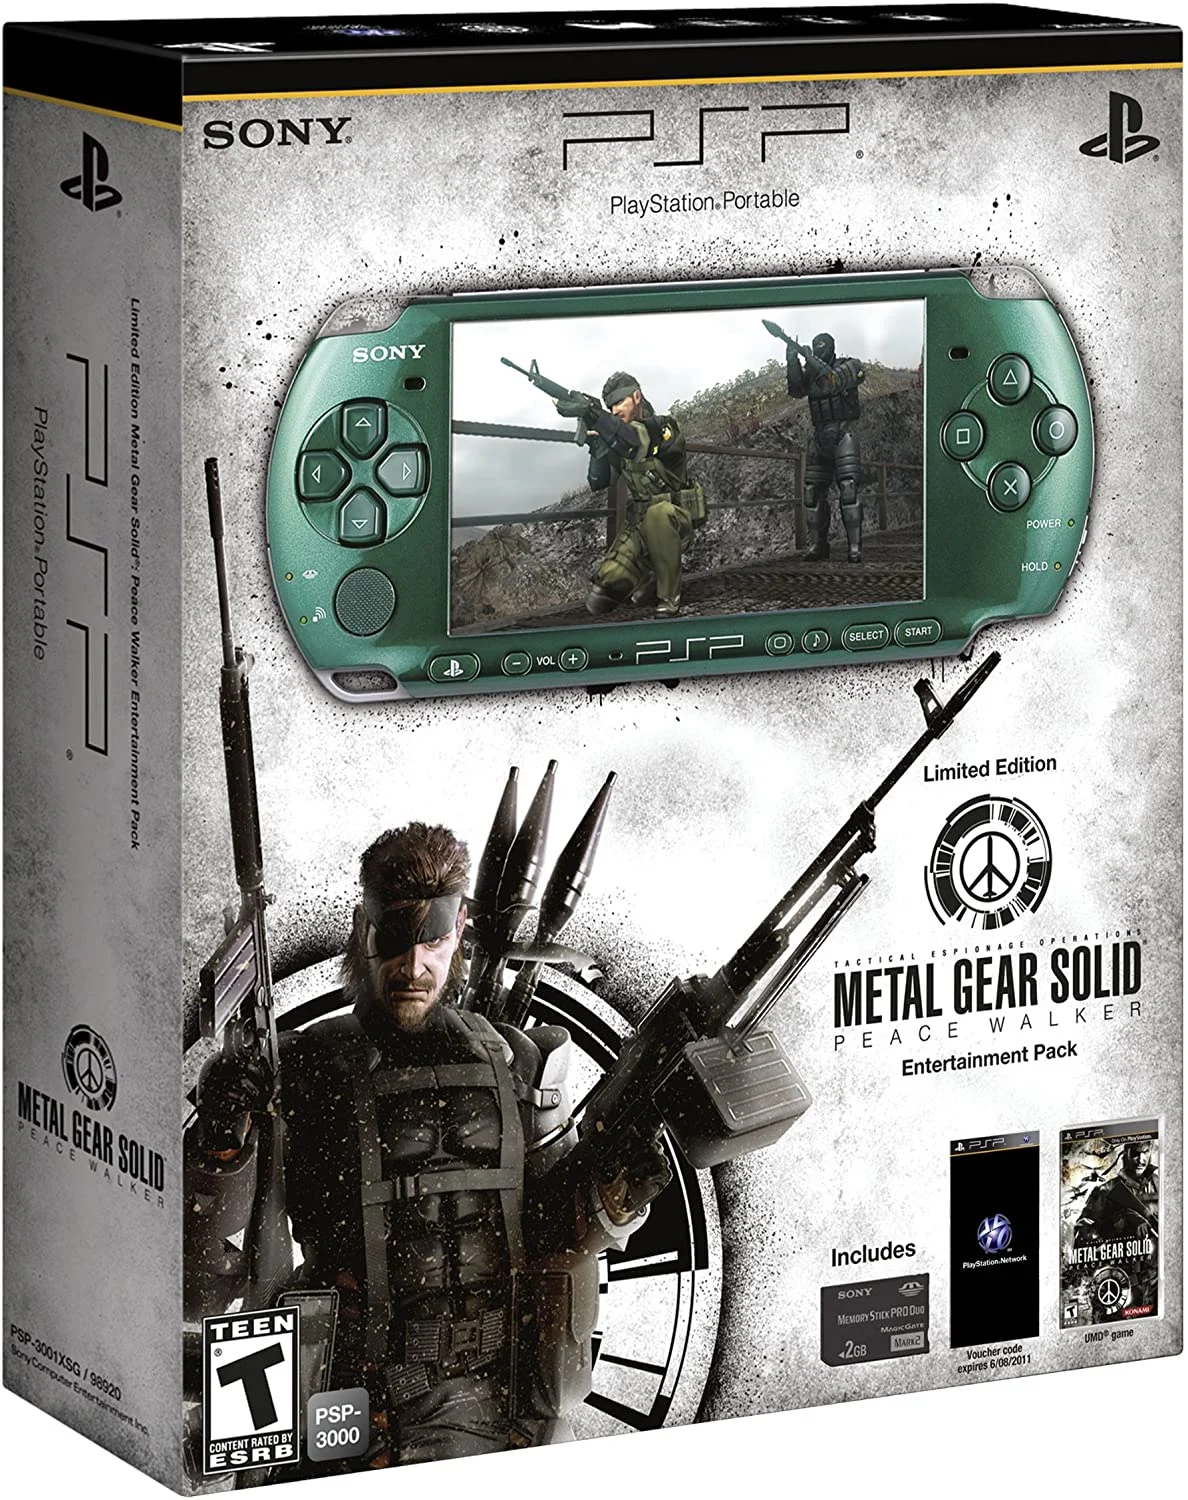  Sony PSP 3000 Metal Gear Solid Console